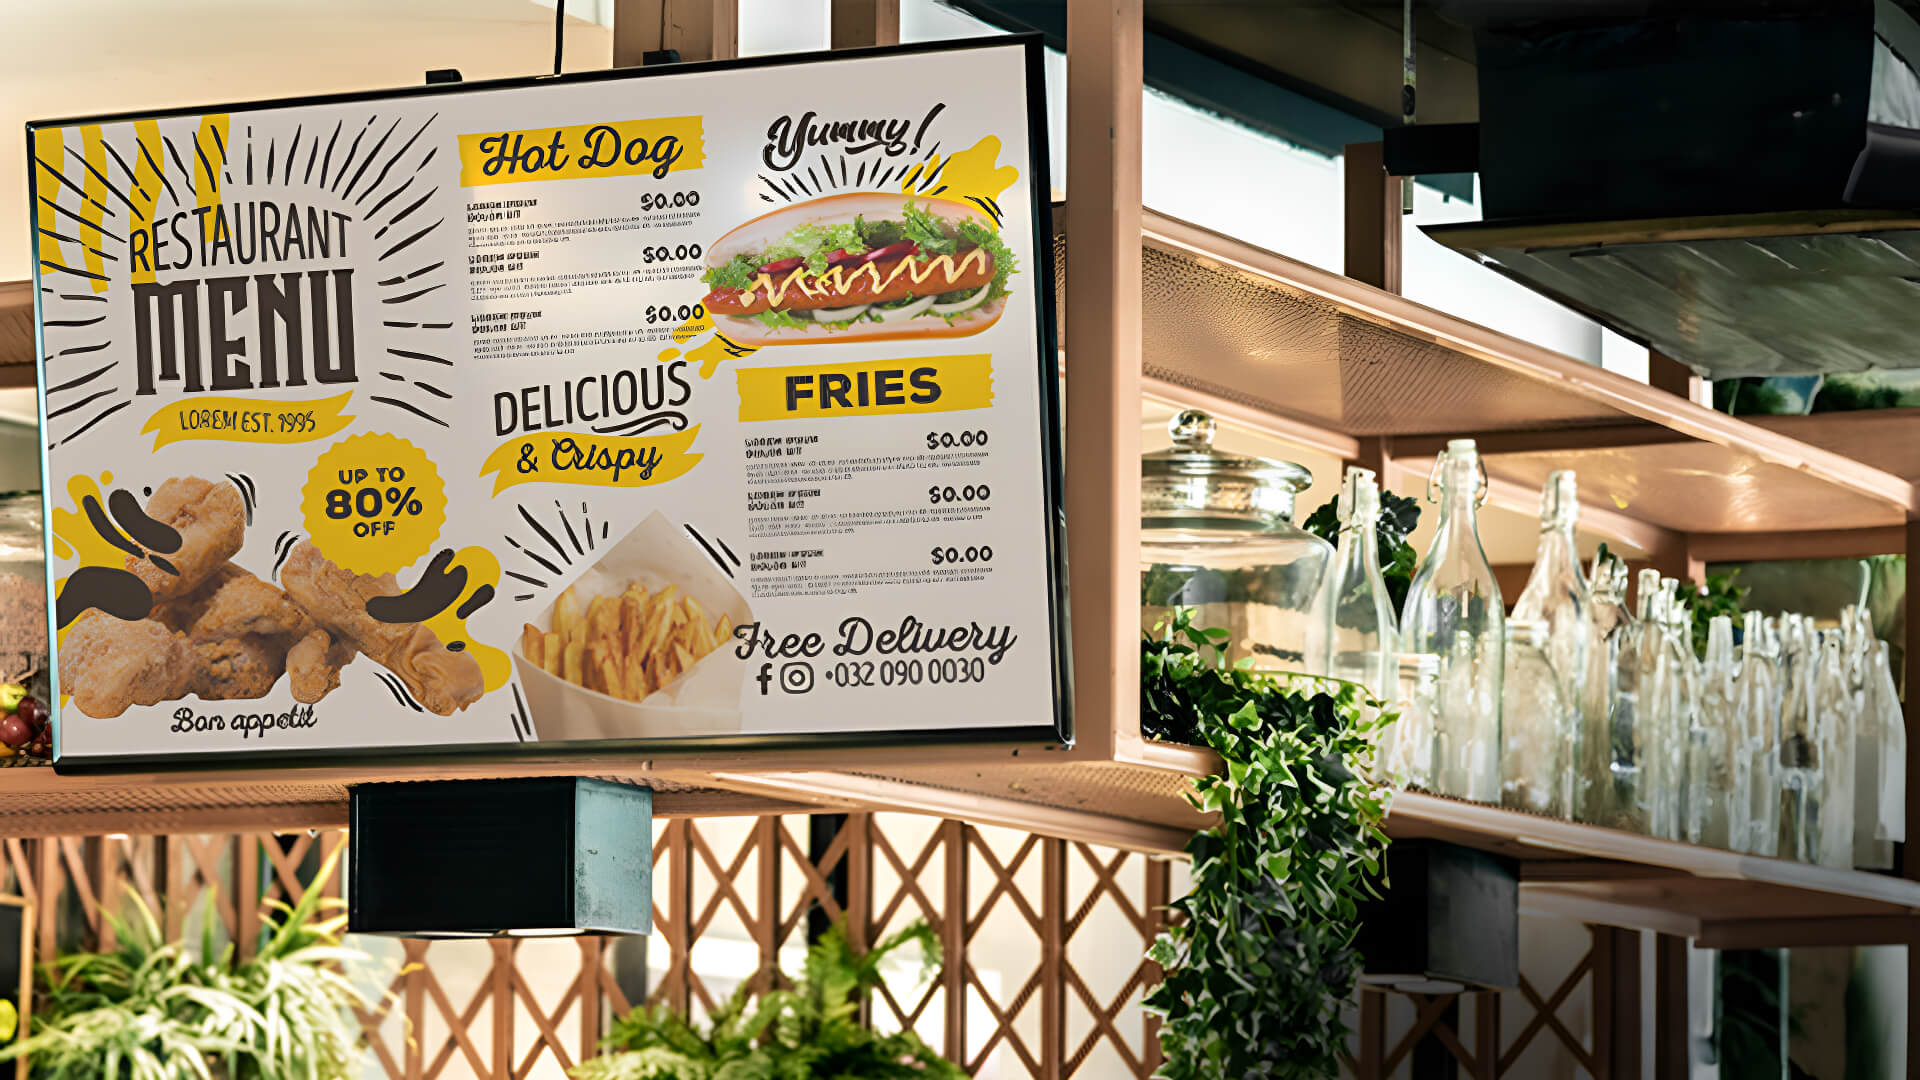  Digital menu solution provided by Big Image Group Pte